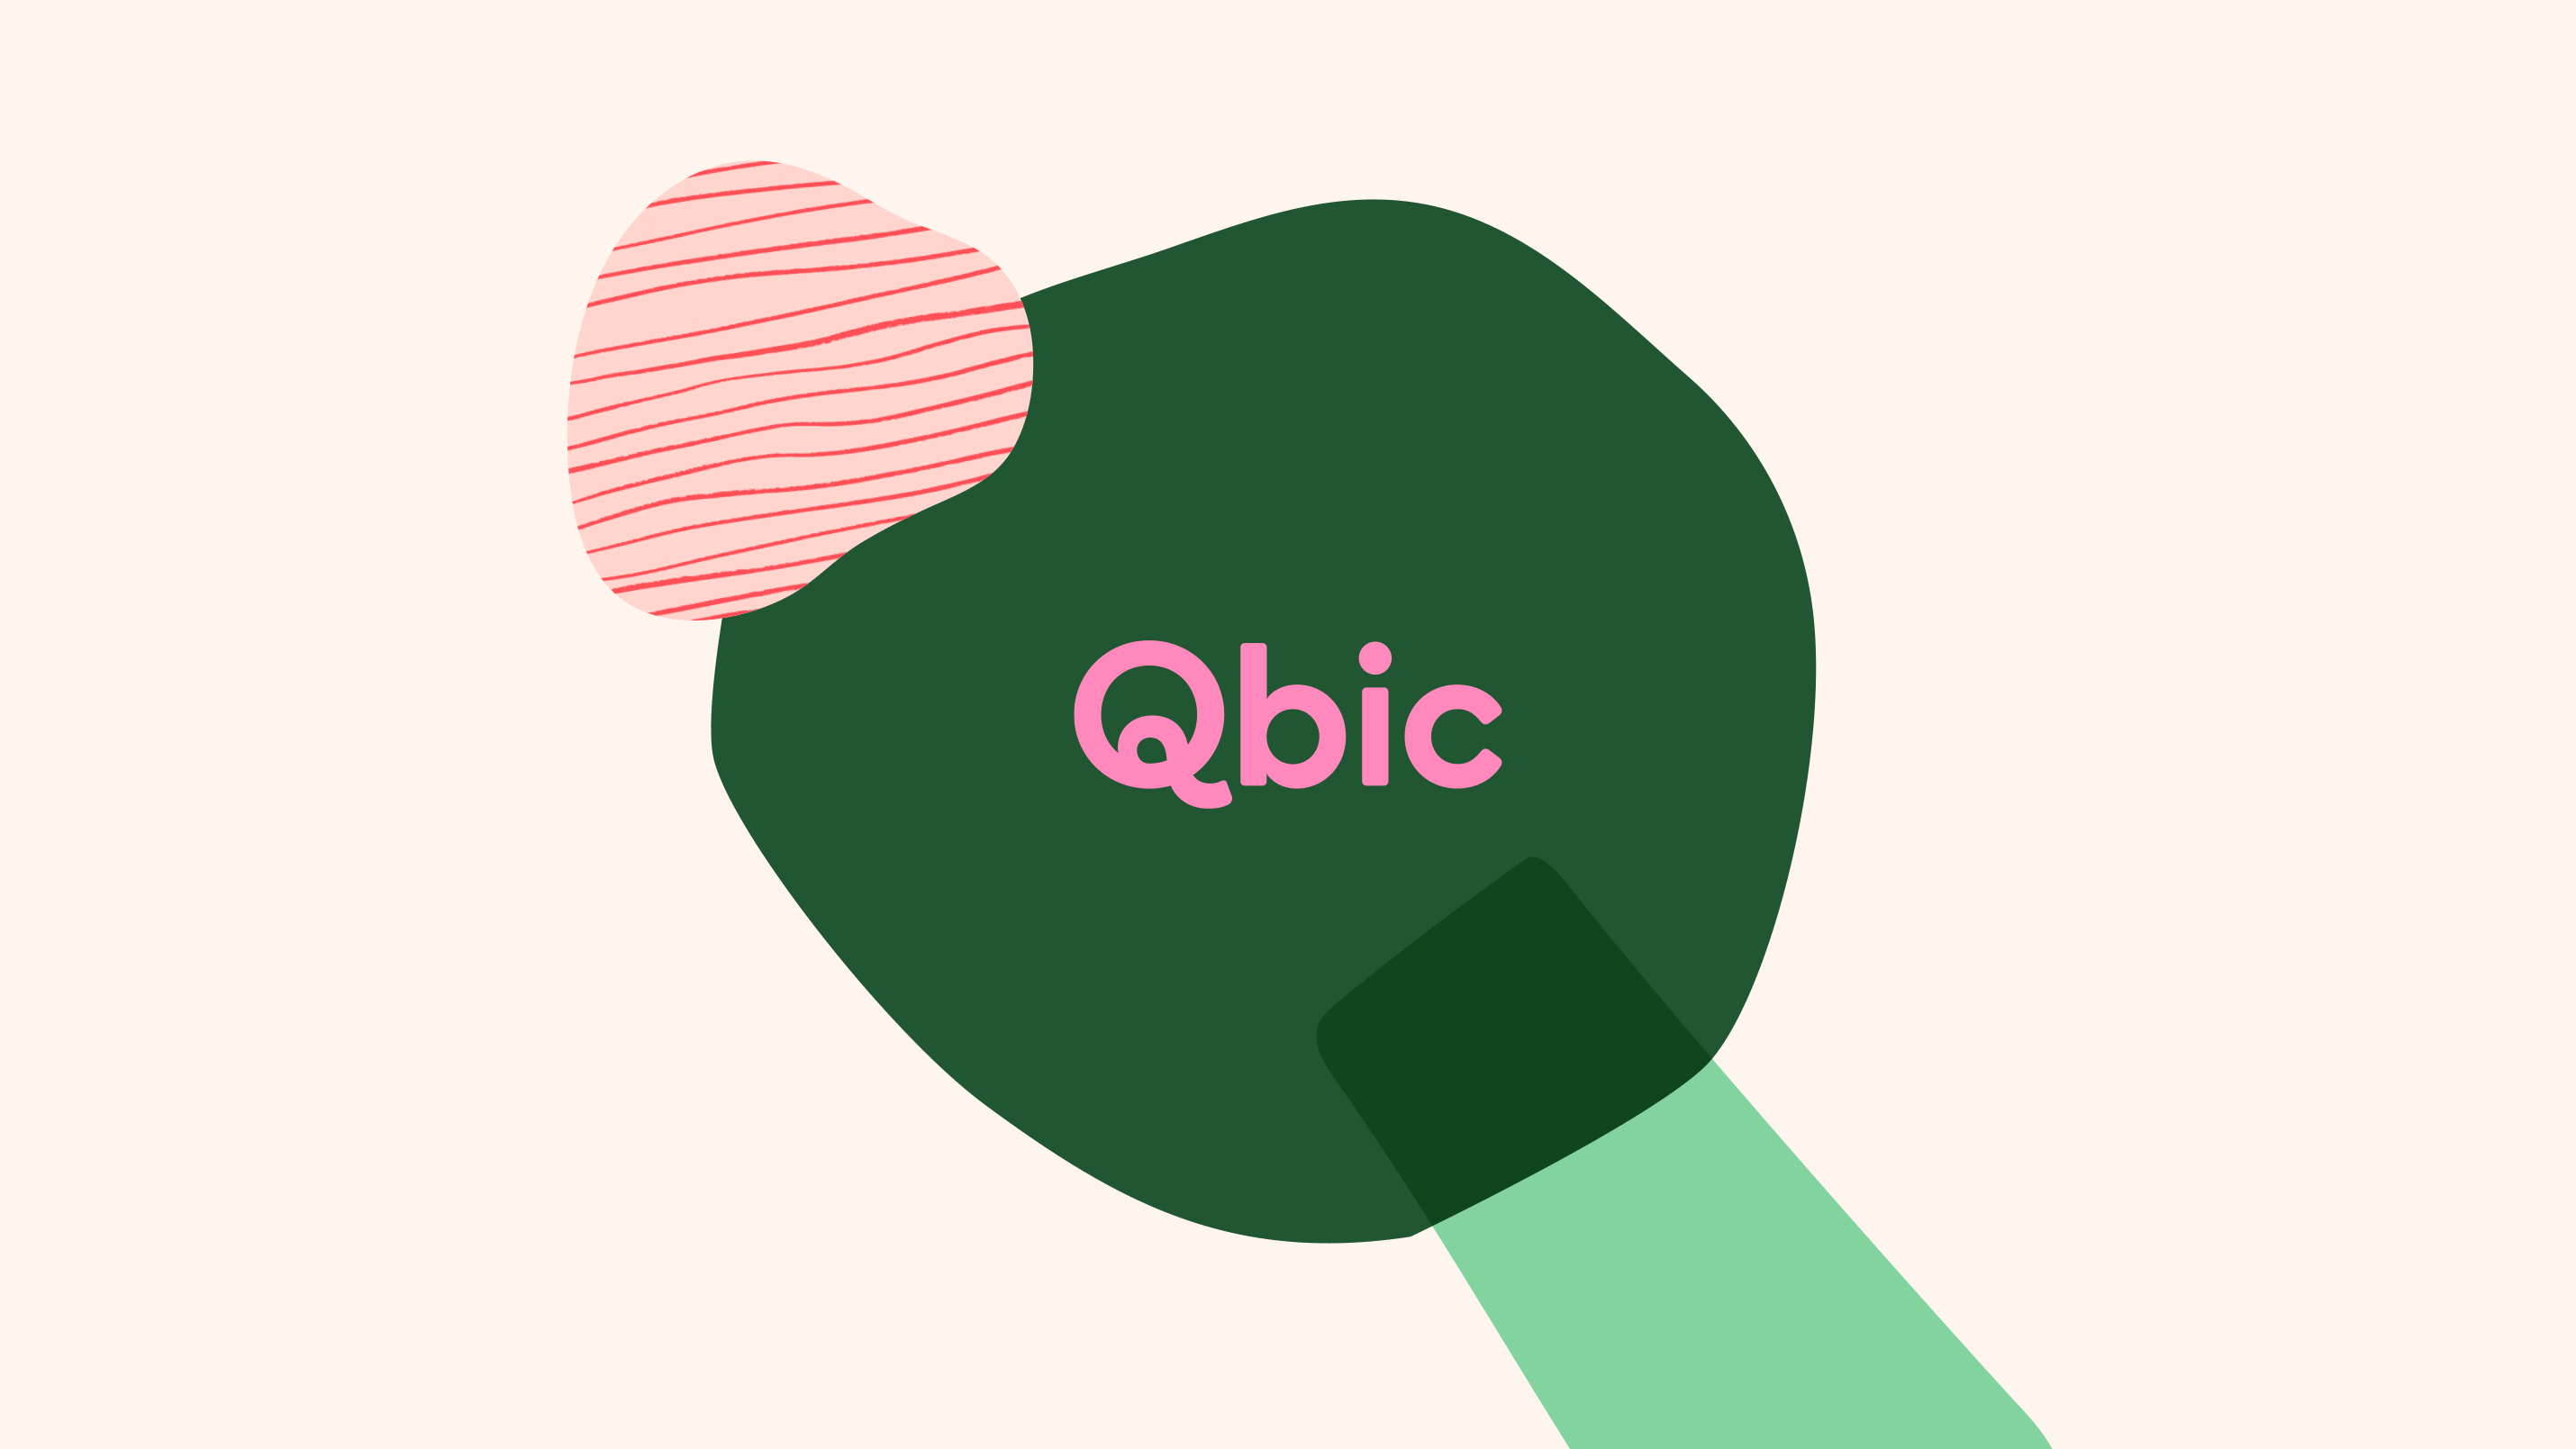 New Logo and Identity for Qbic by Ragged Edge